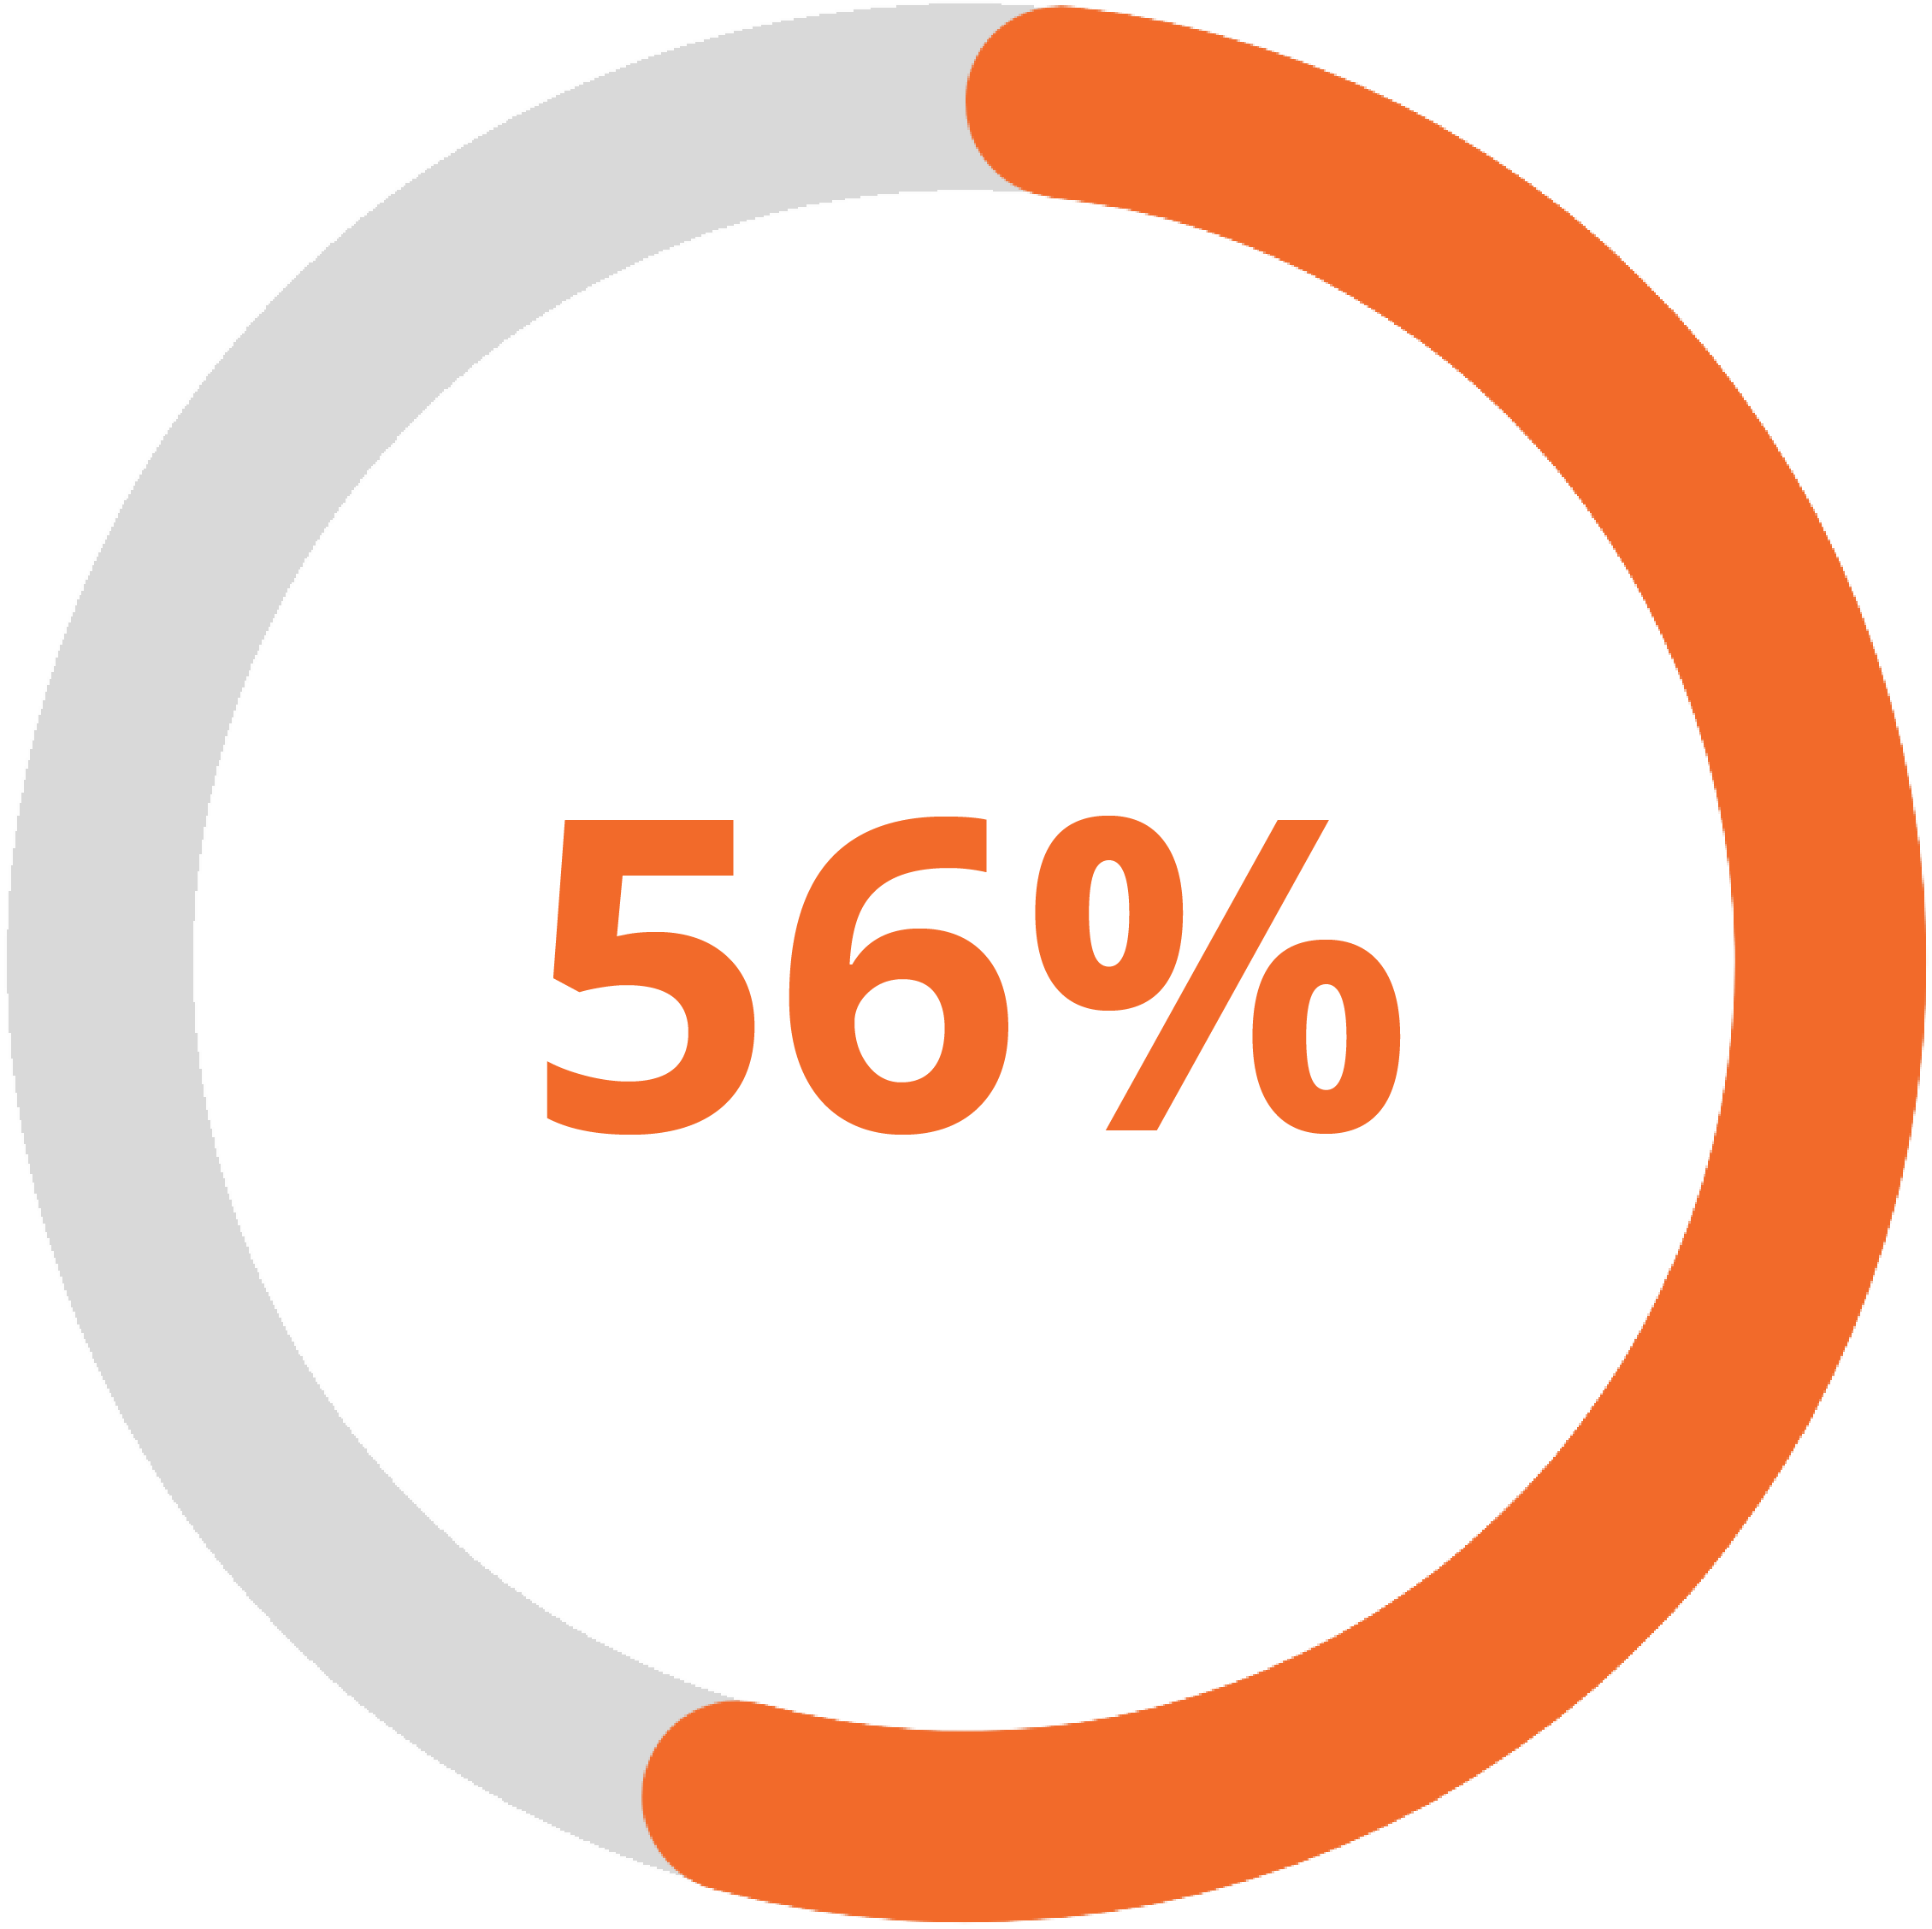 56% report that their average sale amount has increased